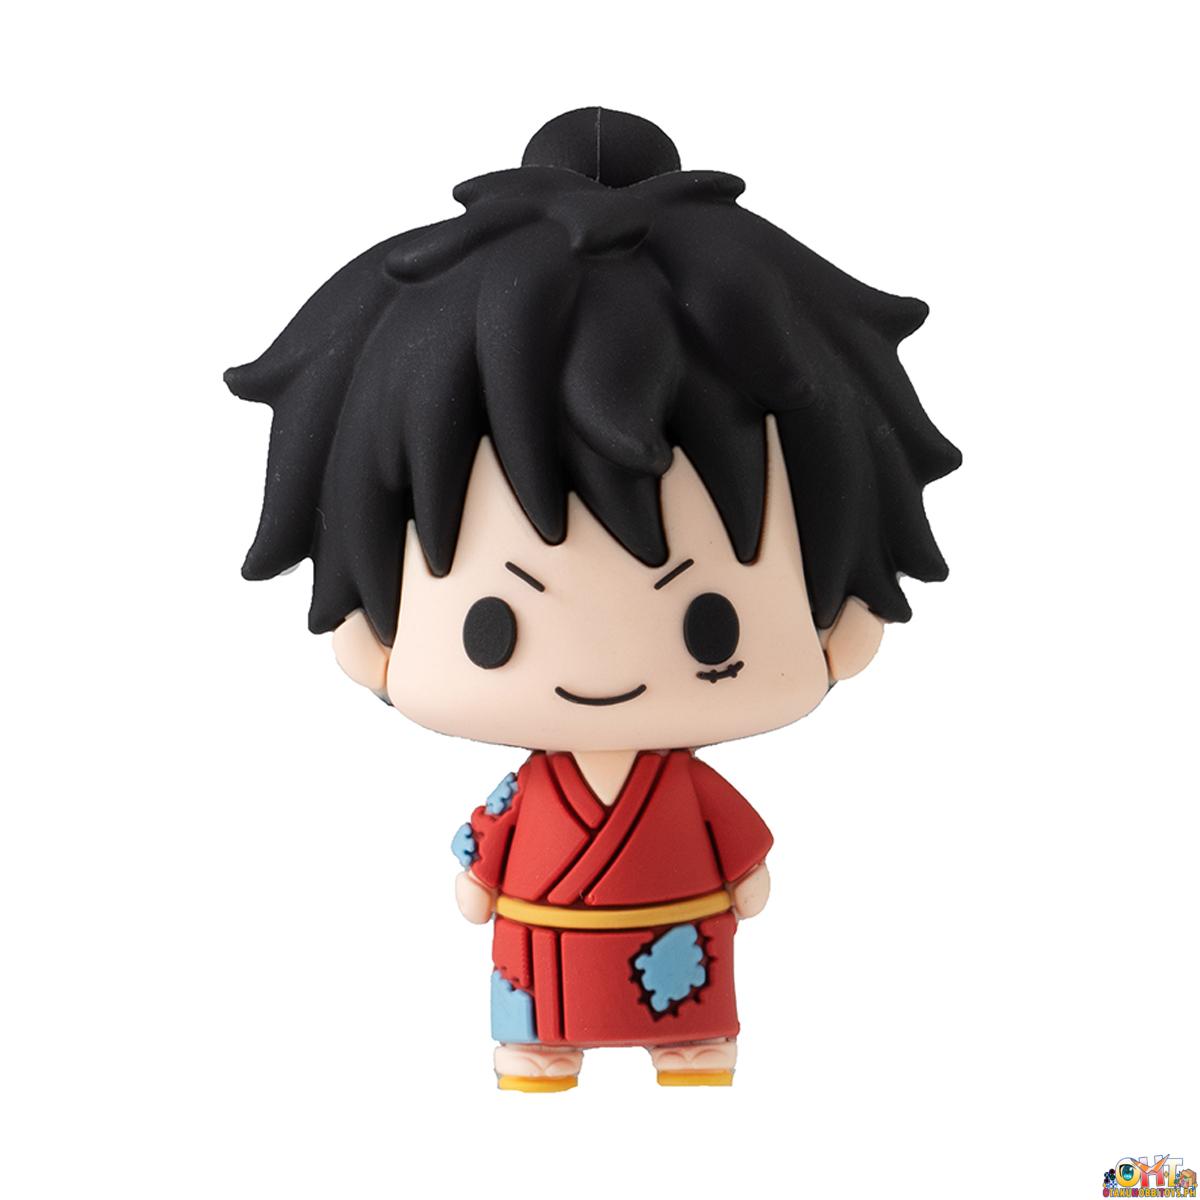 Megahouse Chokorin One Piece Wano Country Edition [Set of 6]